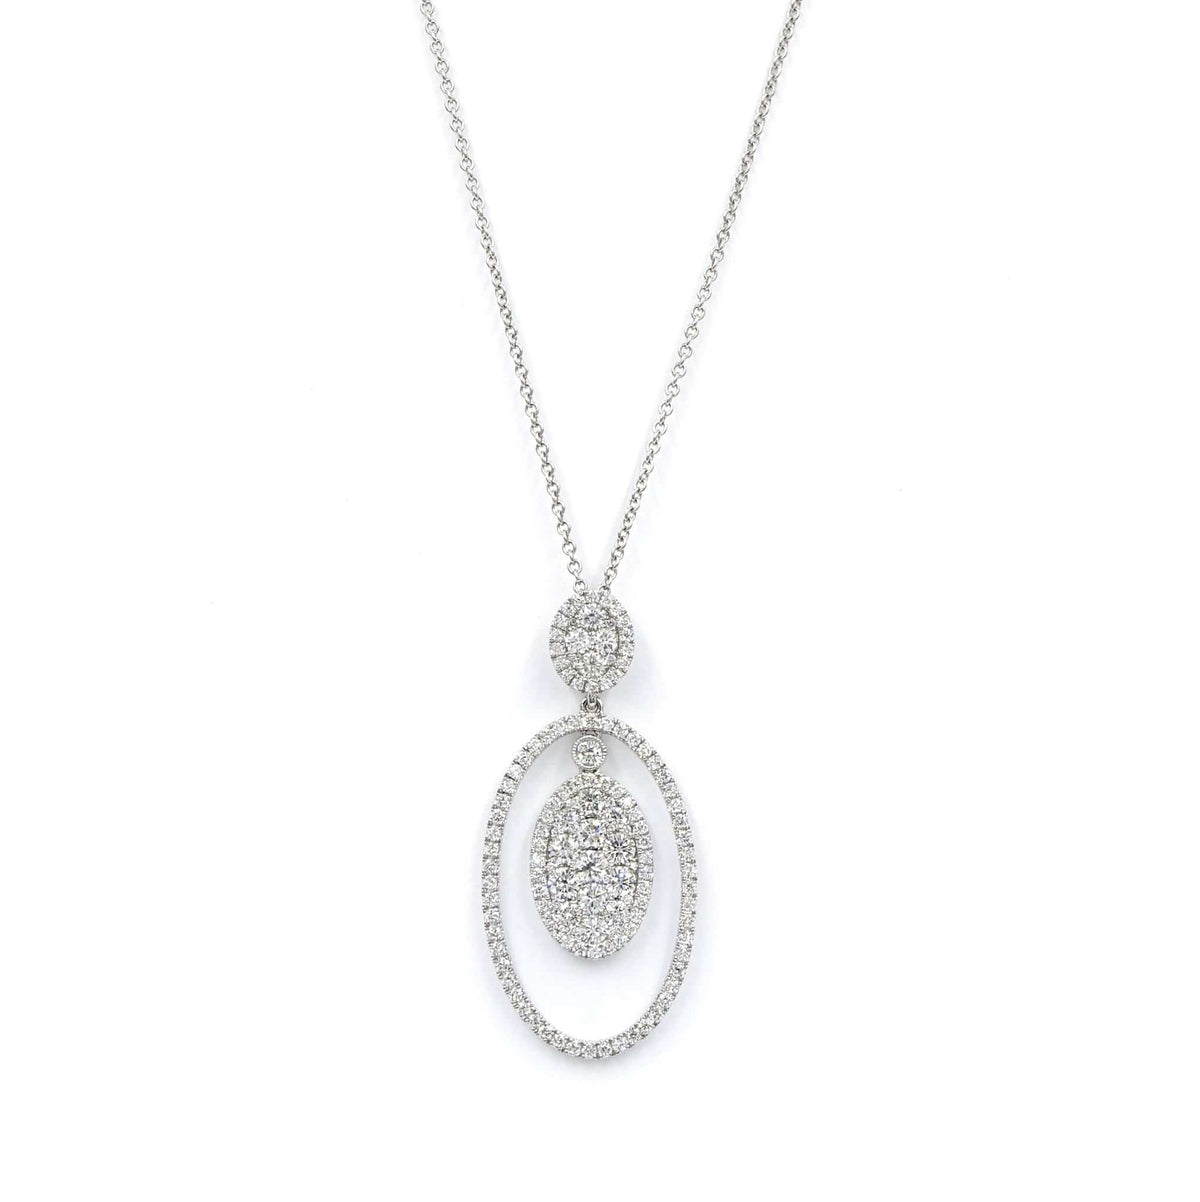 DIAMOND NECKLACE - QUEEN DIANA - Chris Aire Fine Jewelry & Timepieces